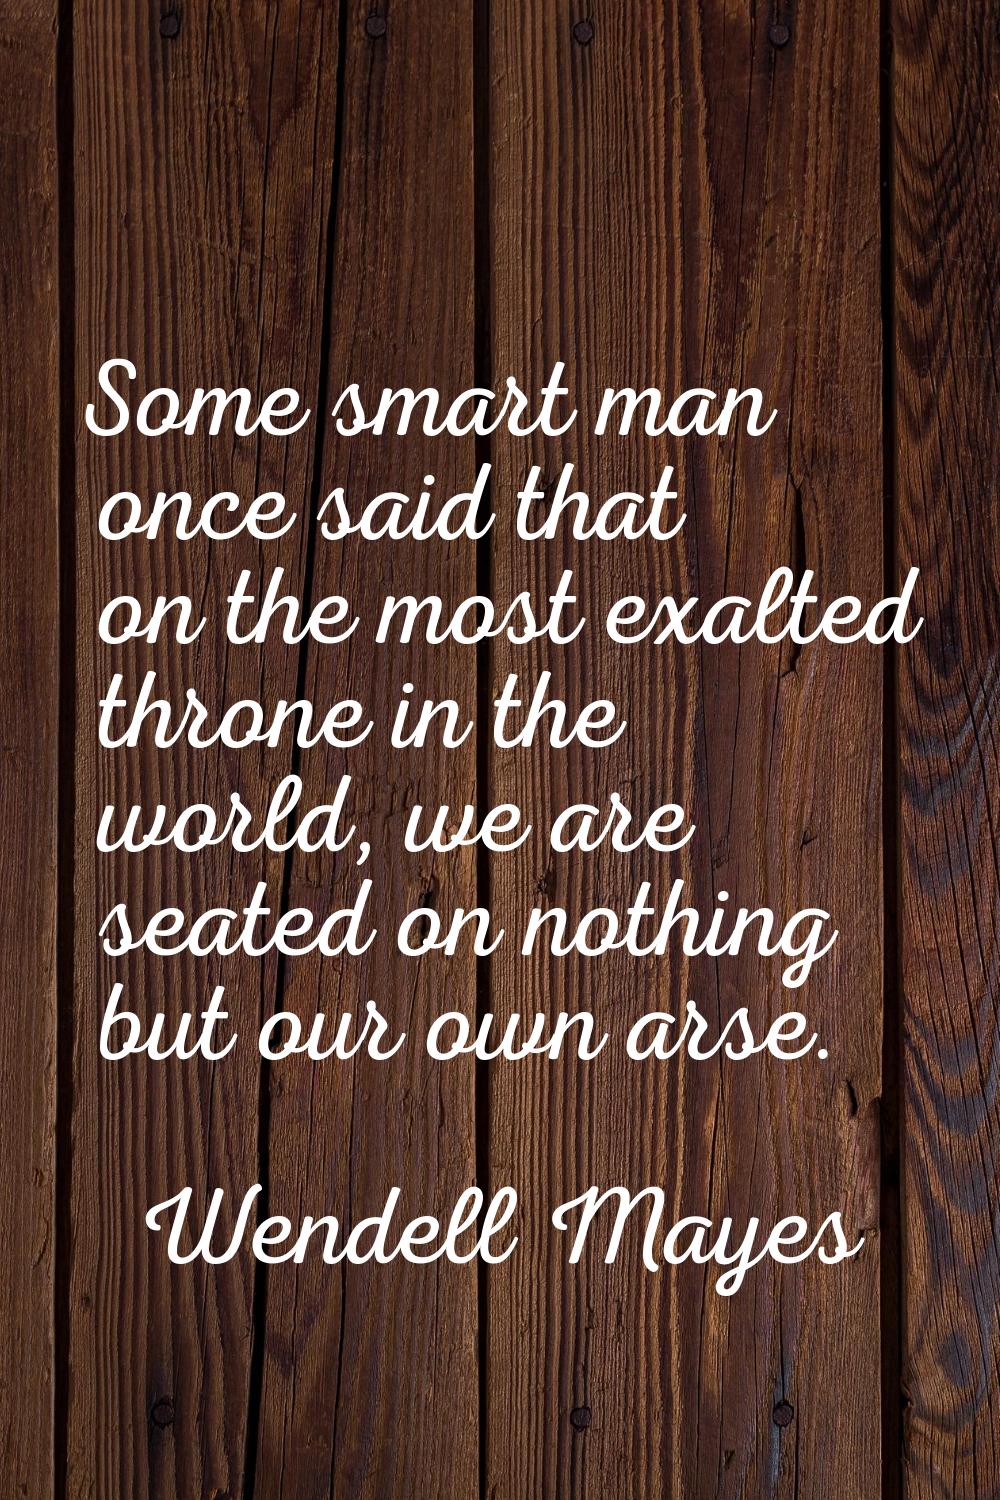 Some smart man once said that on the most exalted throne in the world, we are seated on nothing but